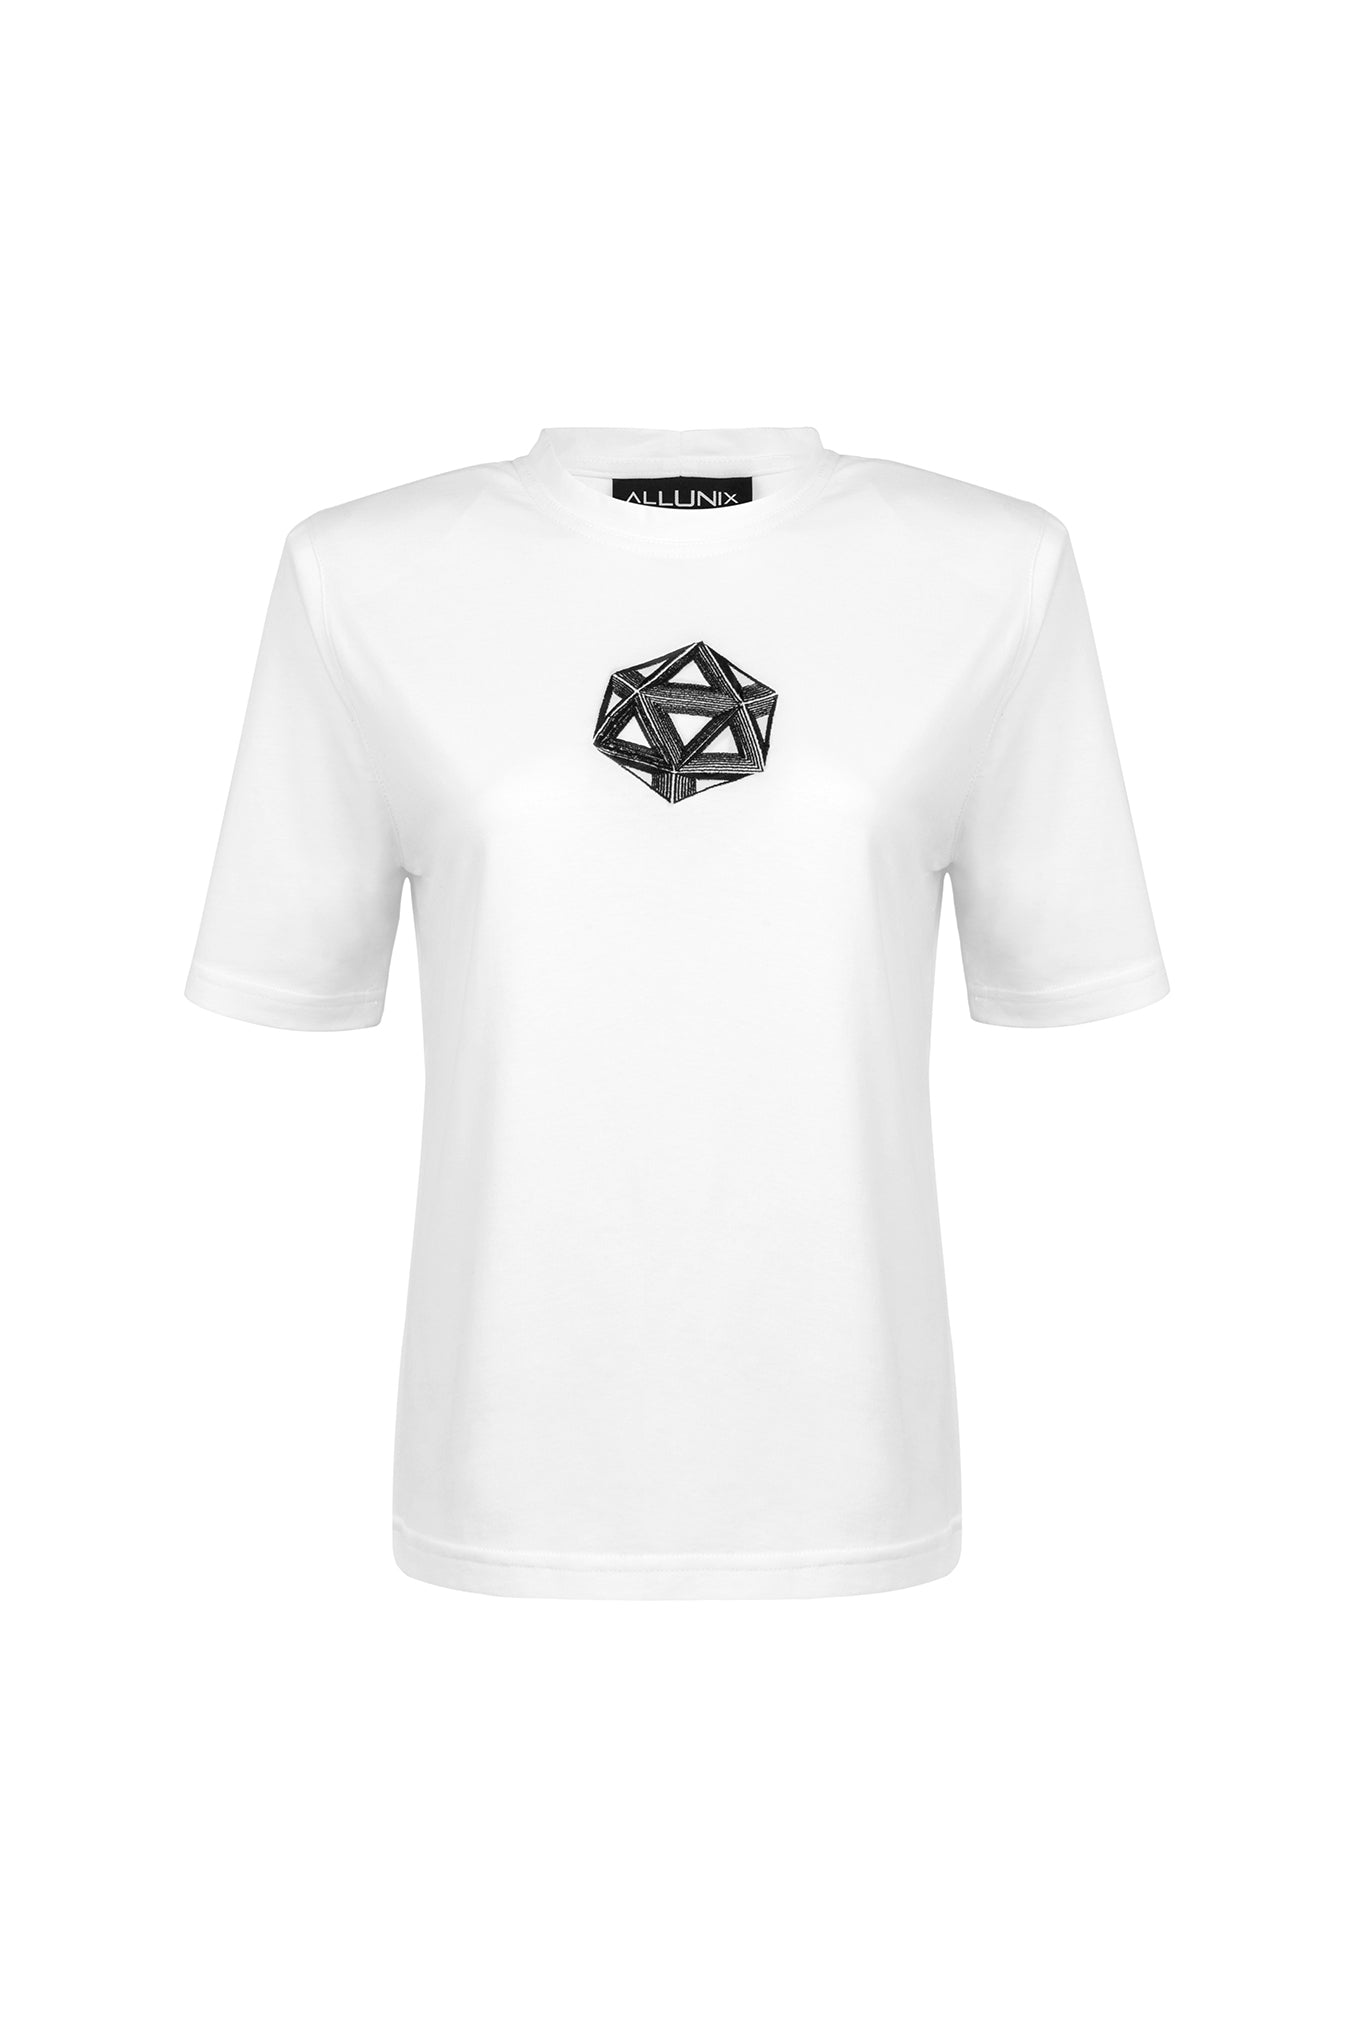 White, oversized silhouette t-shirt with ICOSahedron embroidery in black. The embroidery is in the upper frontal centre of the t-shirt. The fabric is from 100% eco-friendly cotton. It's photographed from the front on white background.